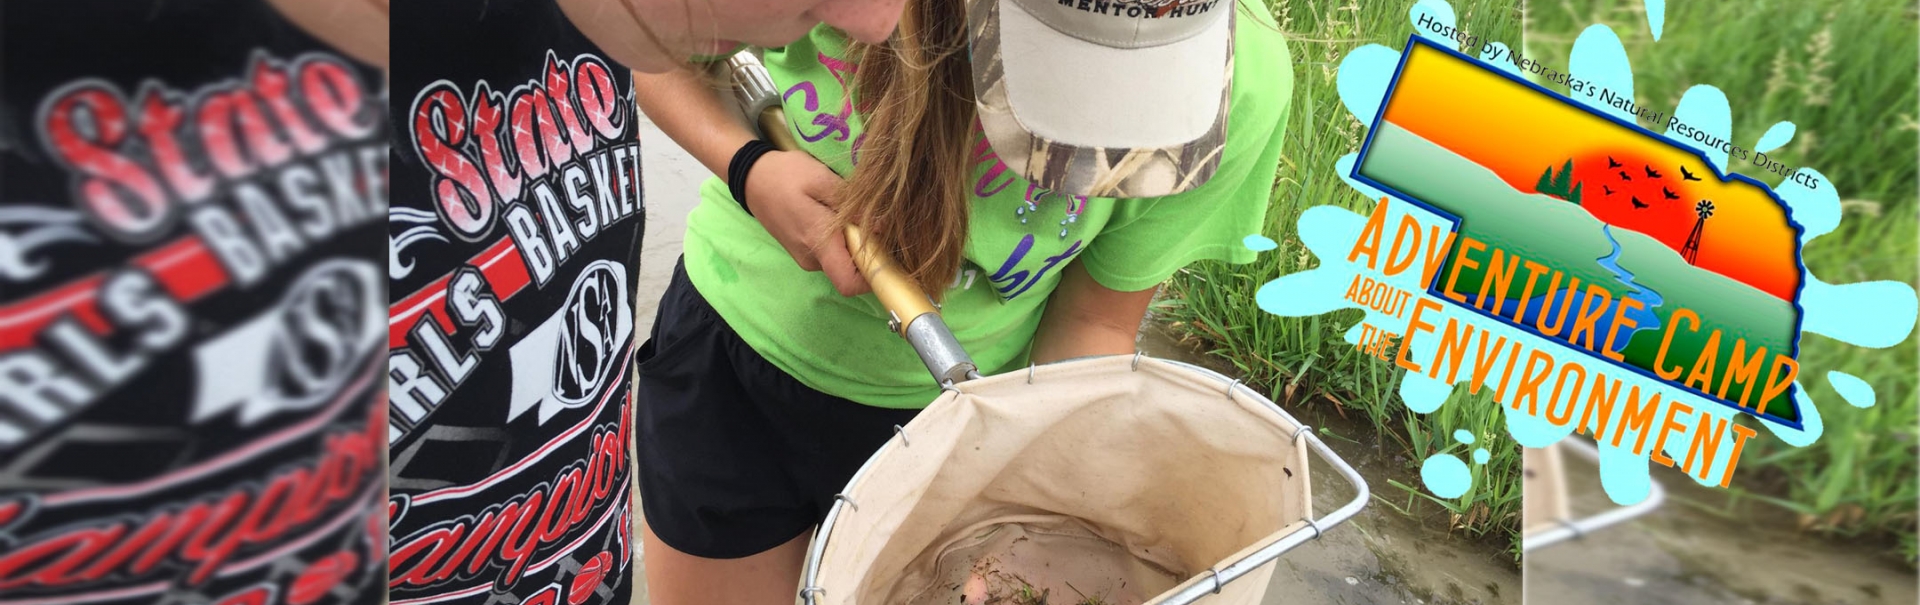 Water Life - Water Quality ACE Camp